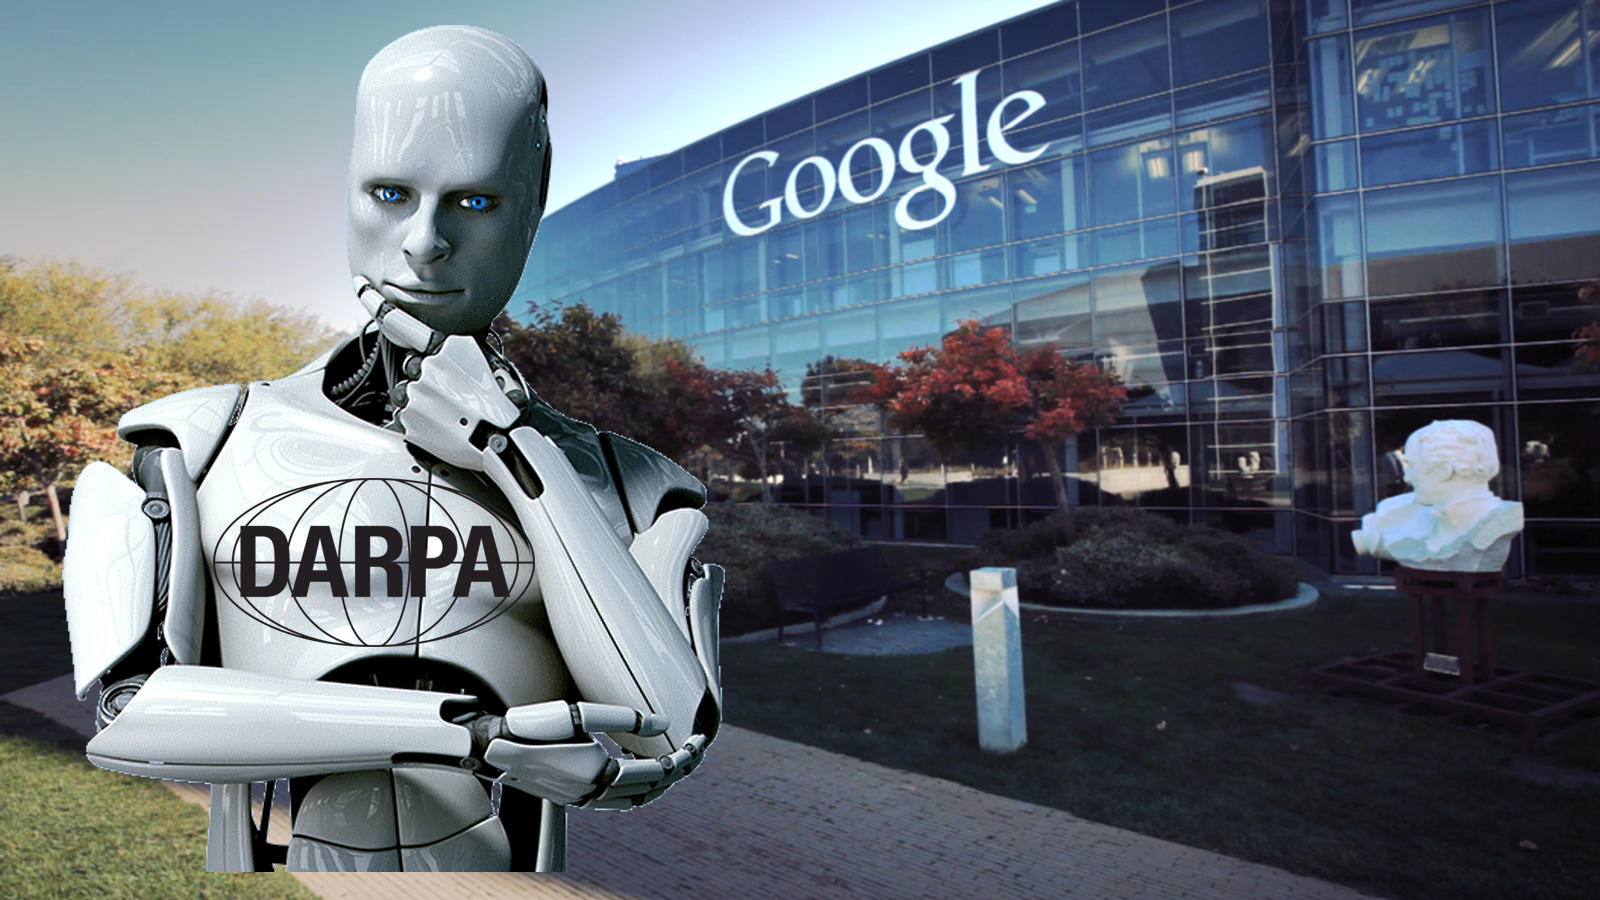 Google's Artificial Intelligence Learns 'Highly Aggressive' Behavior, Concept of Betrayal